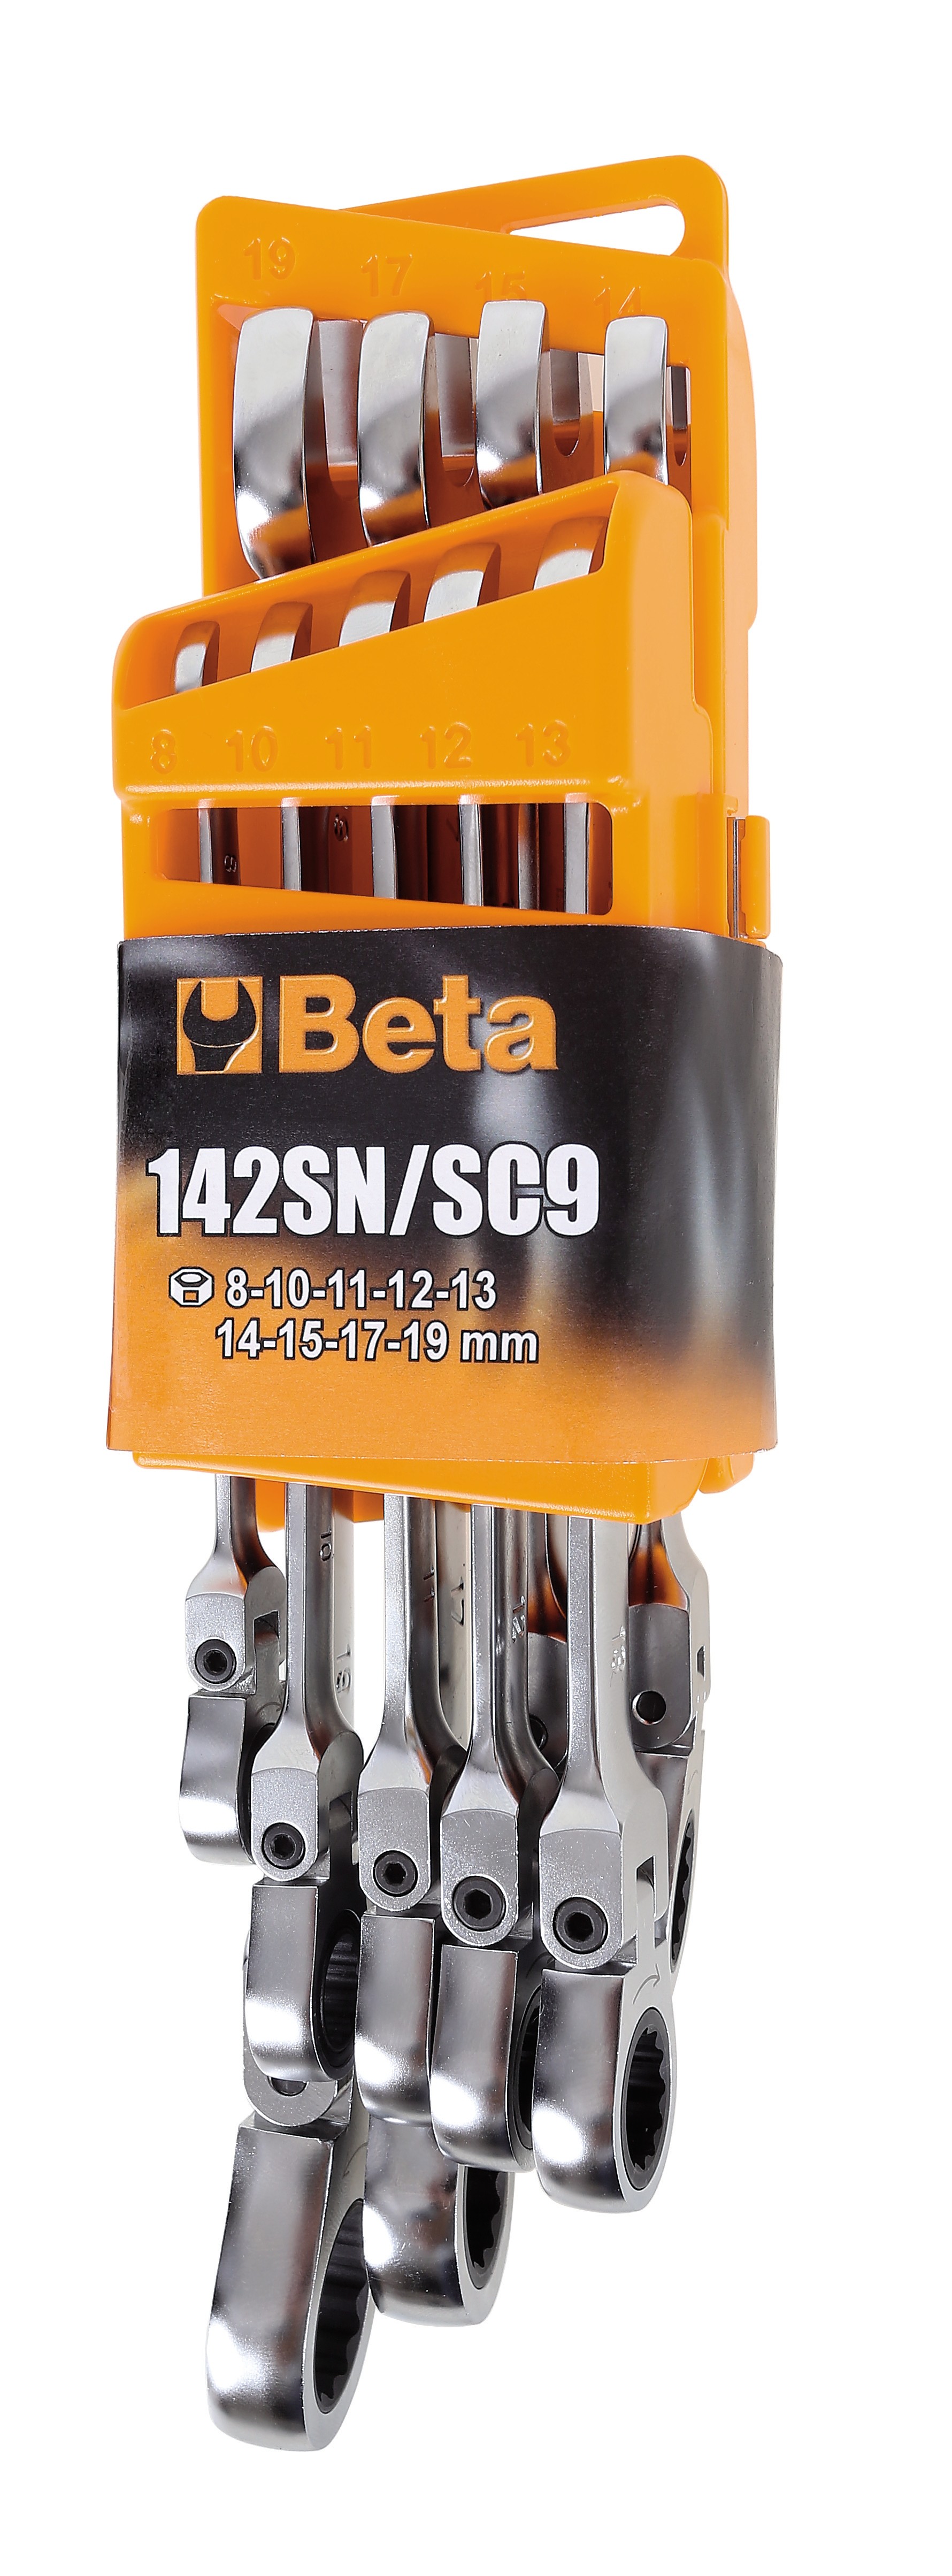 142SN/SC9 set of 9 swivel end ratcheting combination wrenches Beta